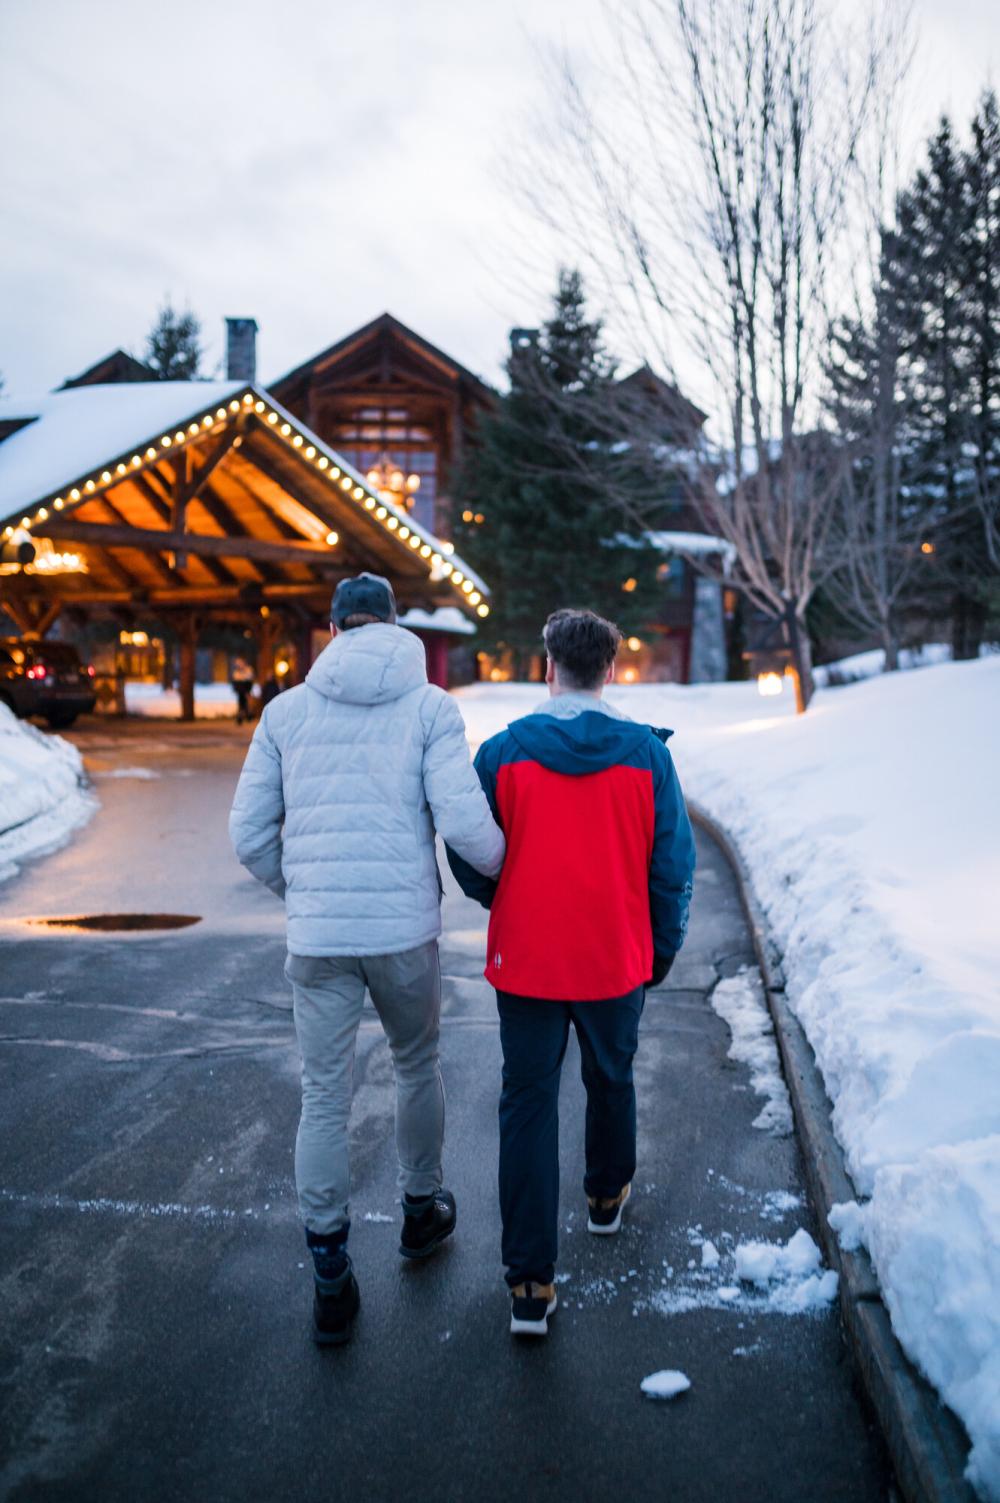 Two men walk up to a winter lodge.